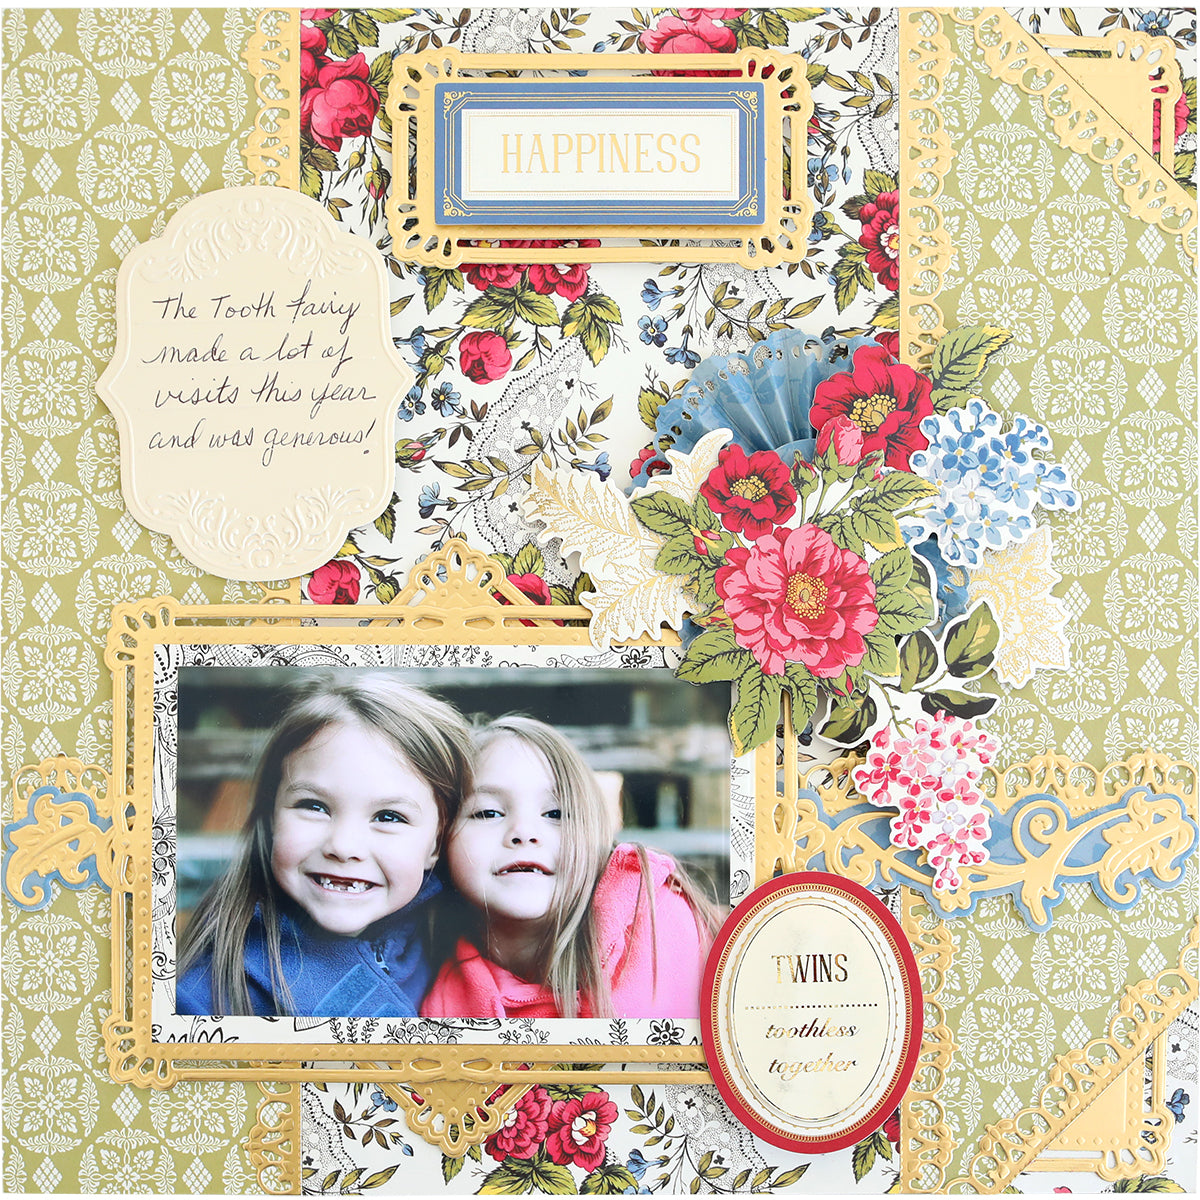 Scrapbooking page featuring a photo of two smiling girls with decorative floral patterns and themed stickers about happiness and twins embellished with Journaling Tags Cut and Emboss Folders.